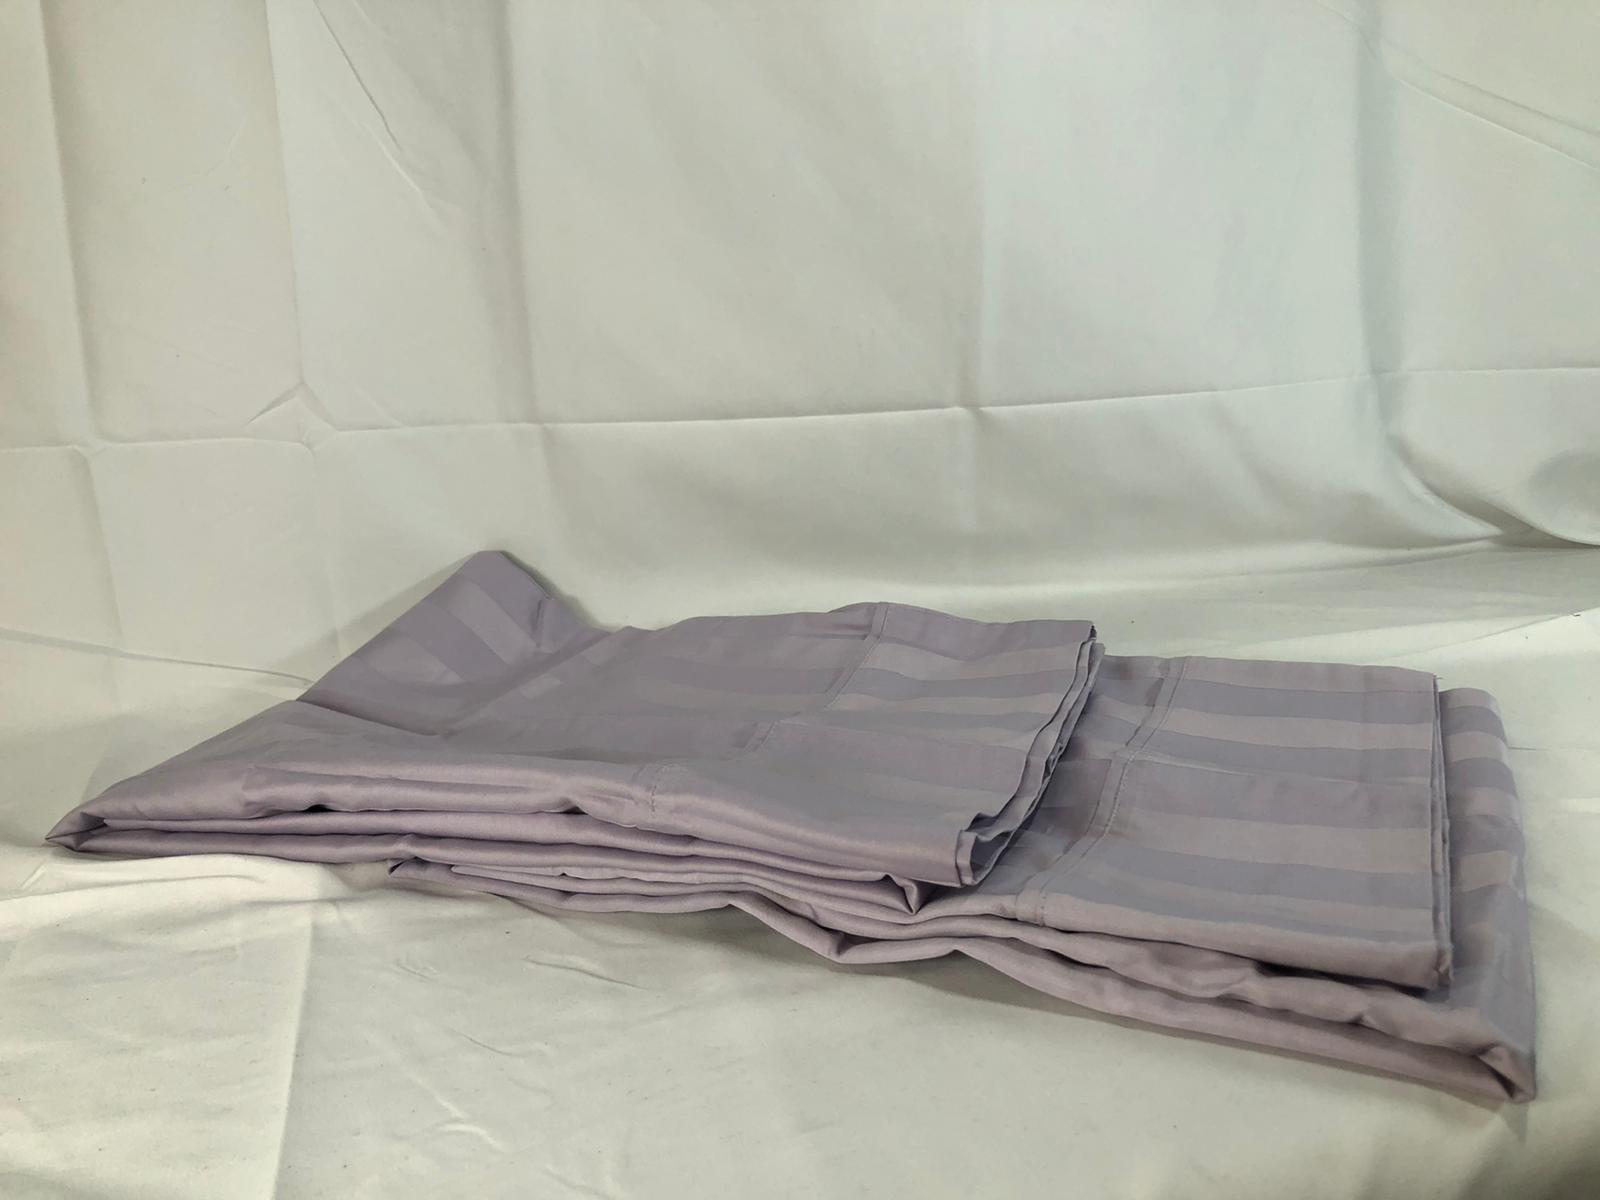 "As is" Northern Nights 650TC Egyptian Cotton Dobby Stripe Pillowcases